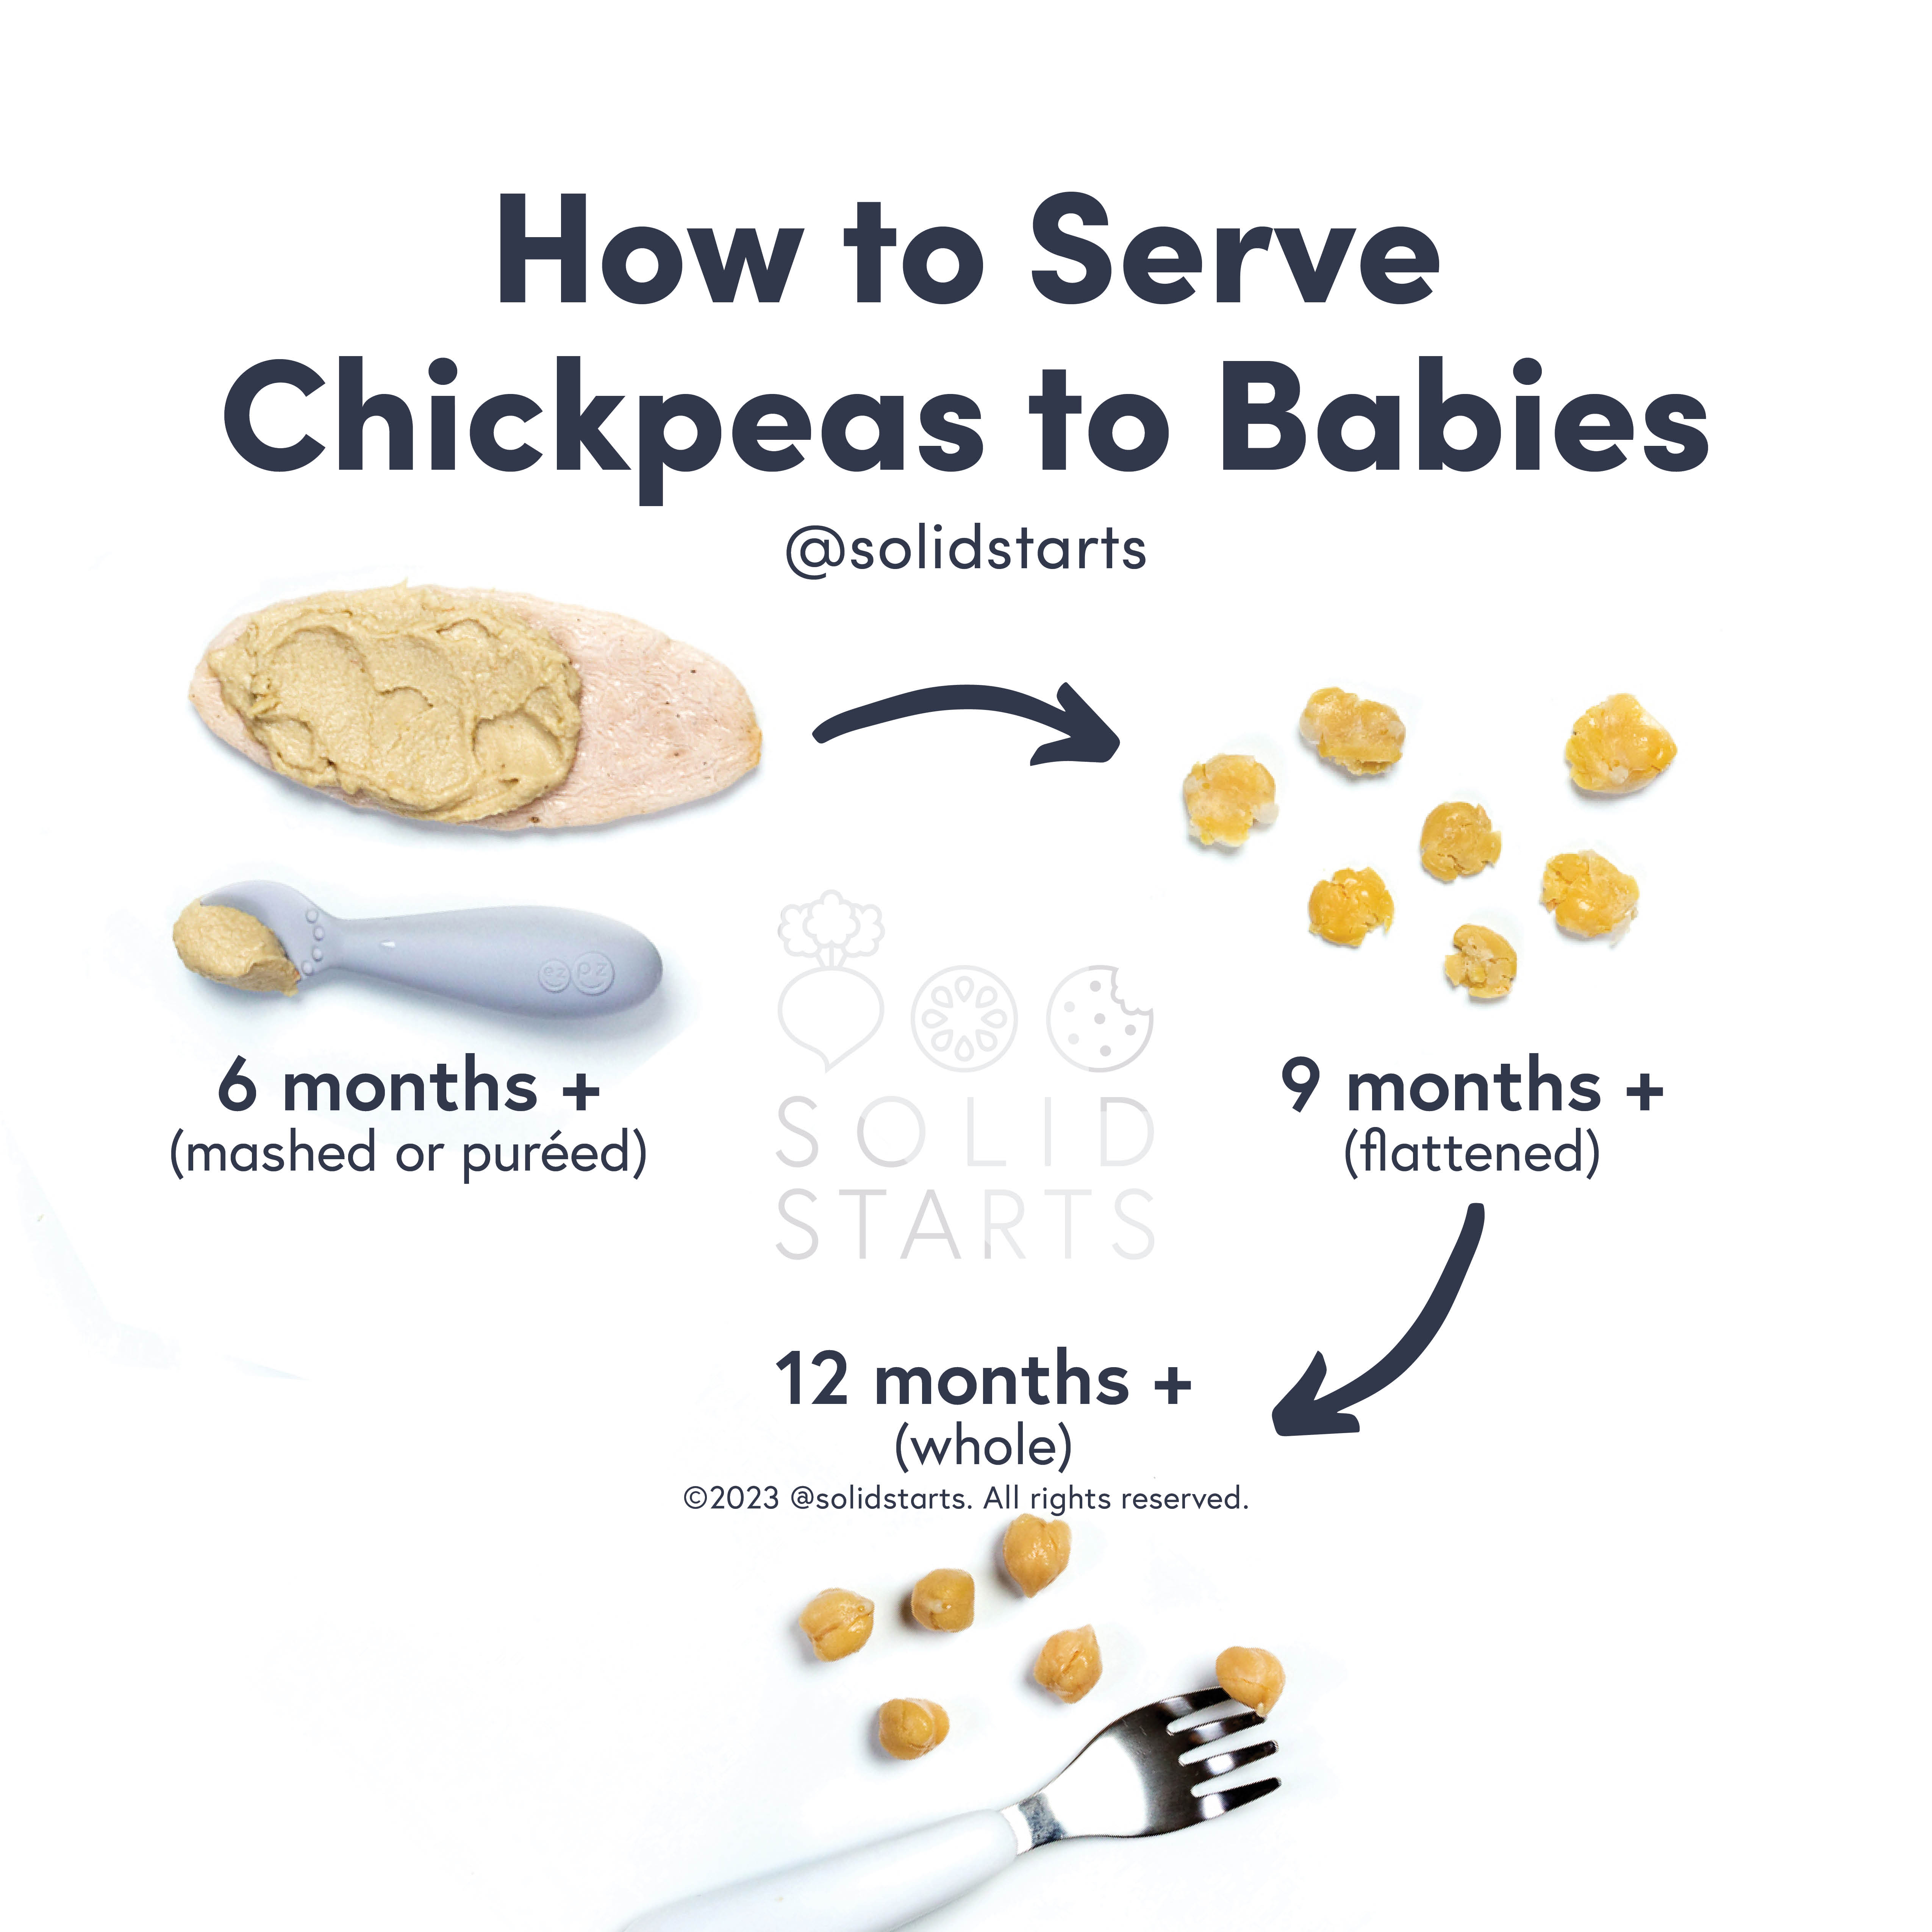 How to Serve Chickpeas to Babies